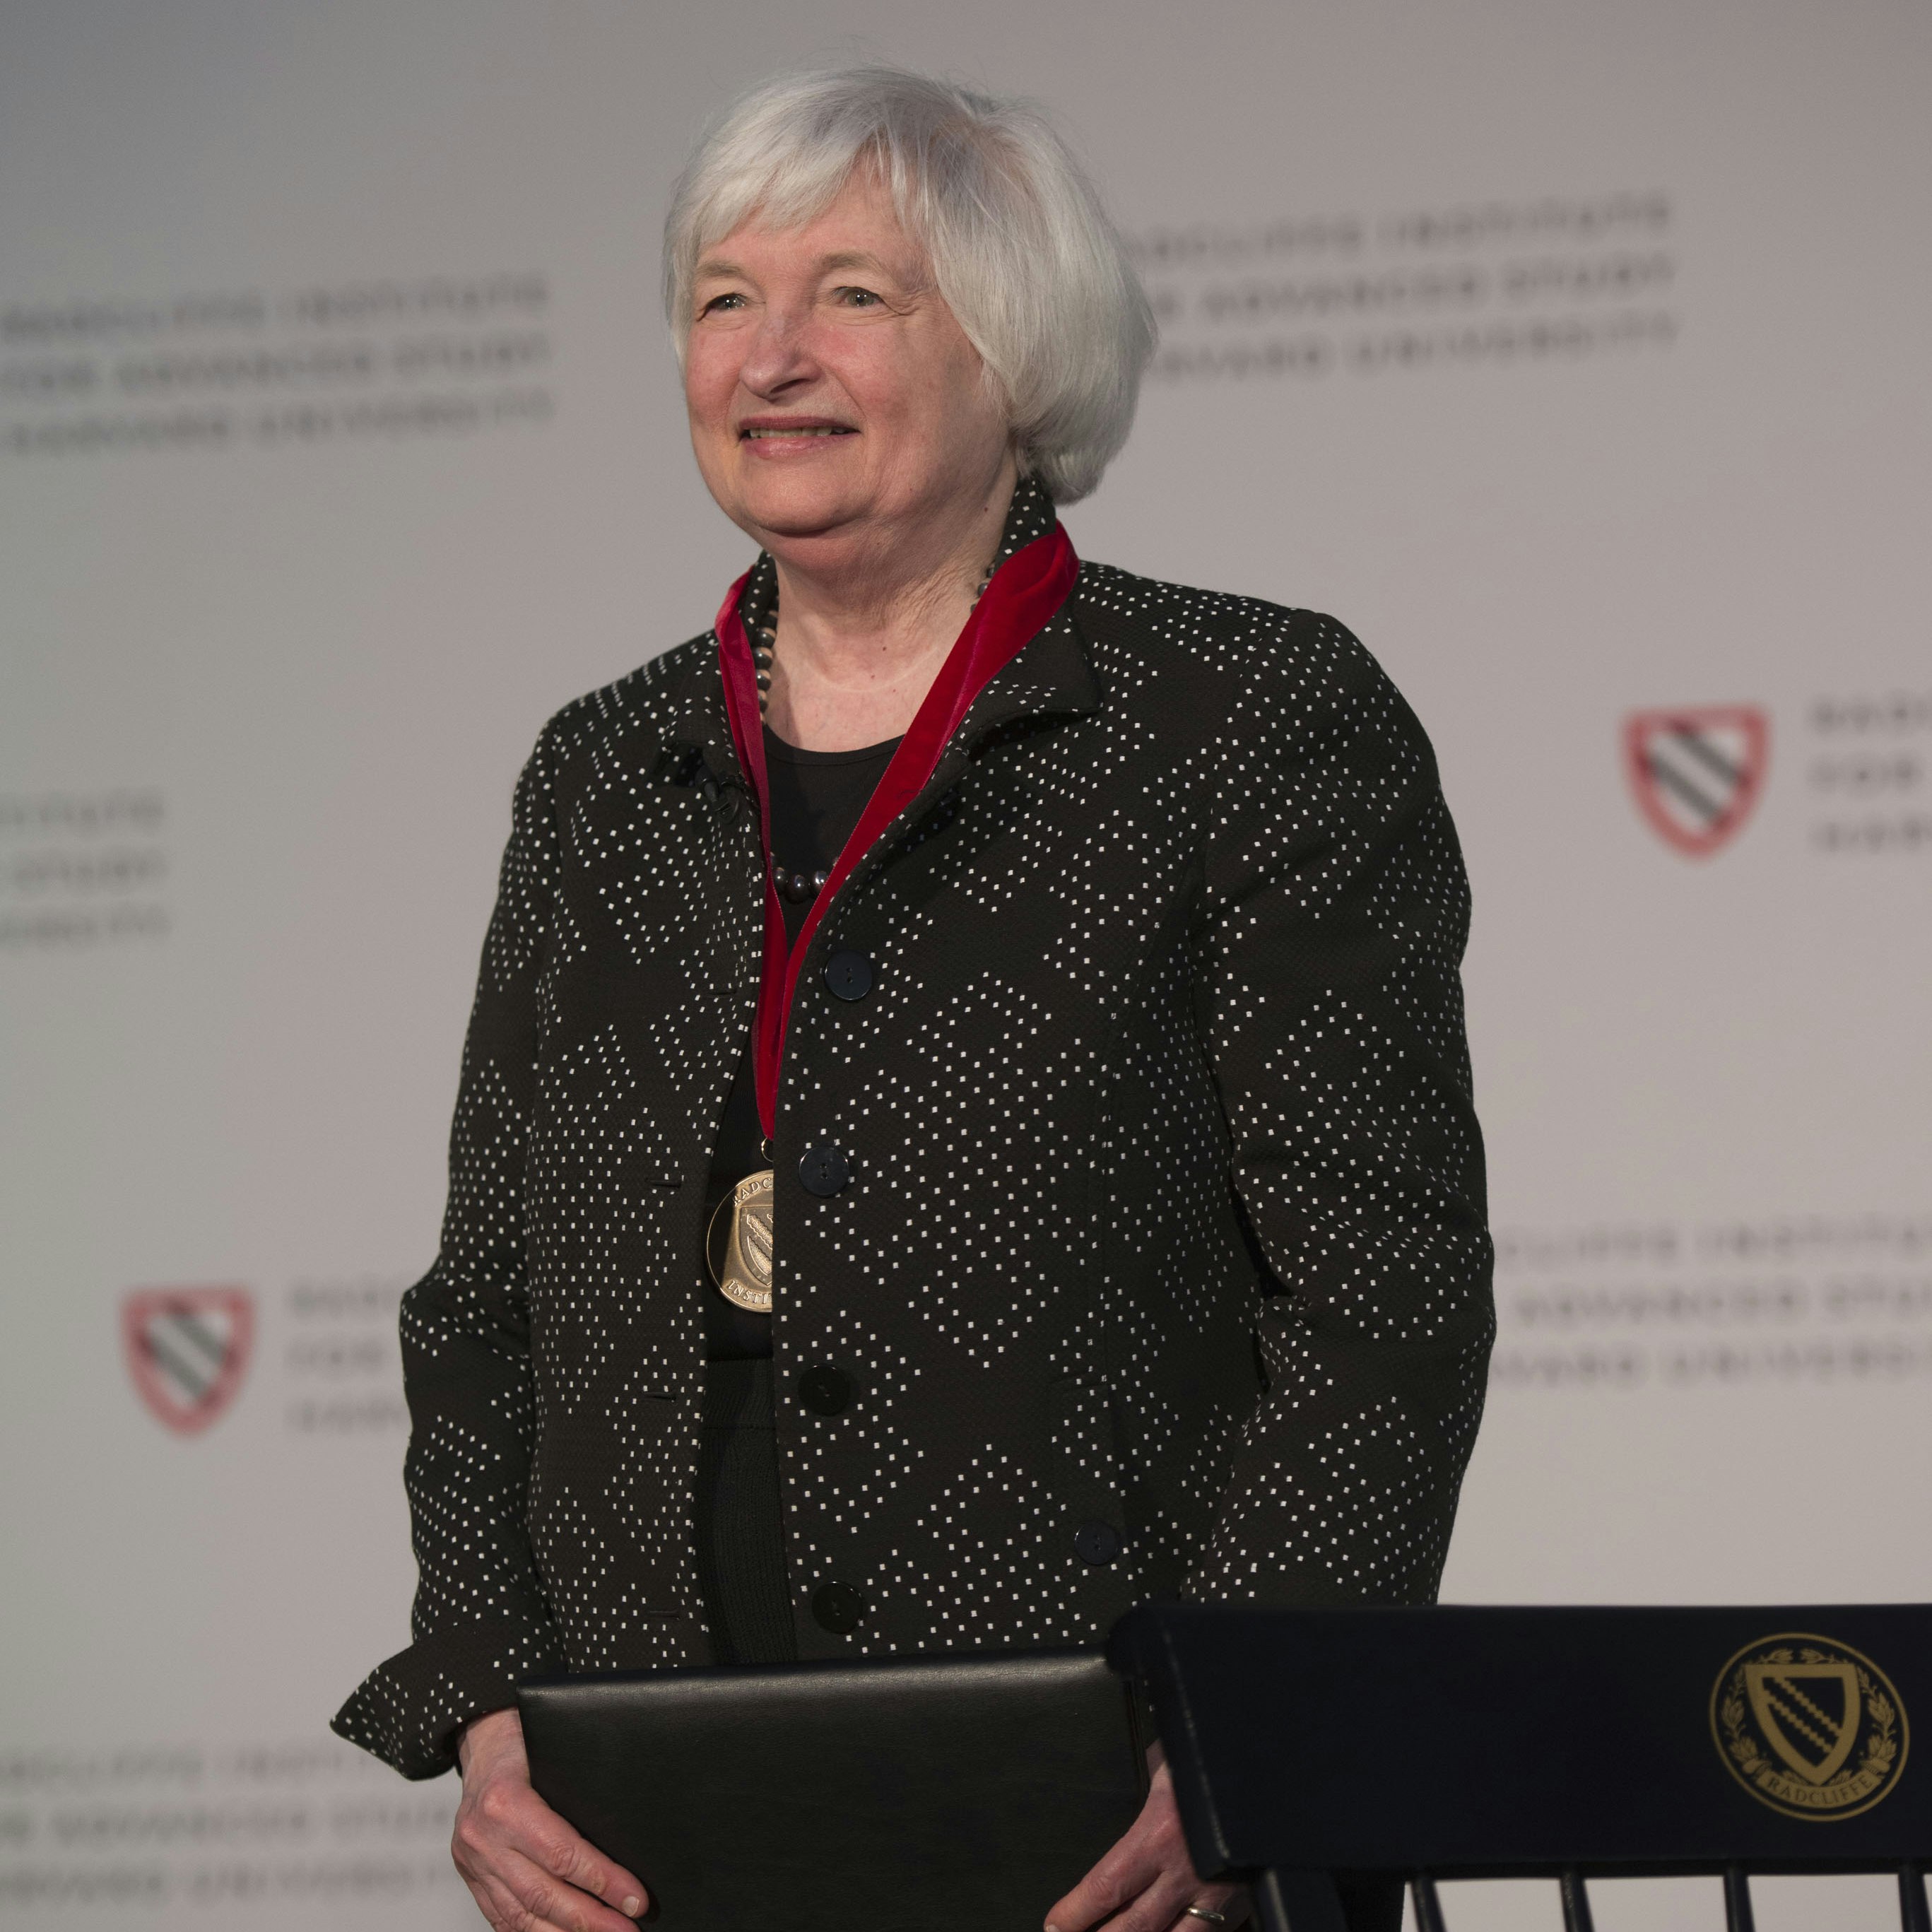 Janet Yellen receiving her medal at Radcliffe Day 2016.